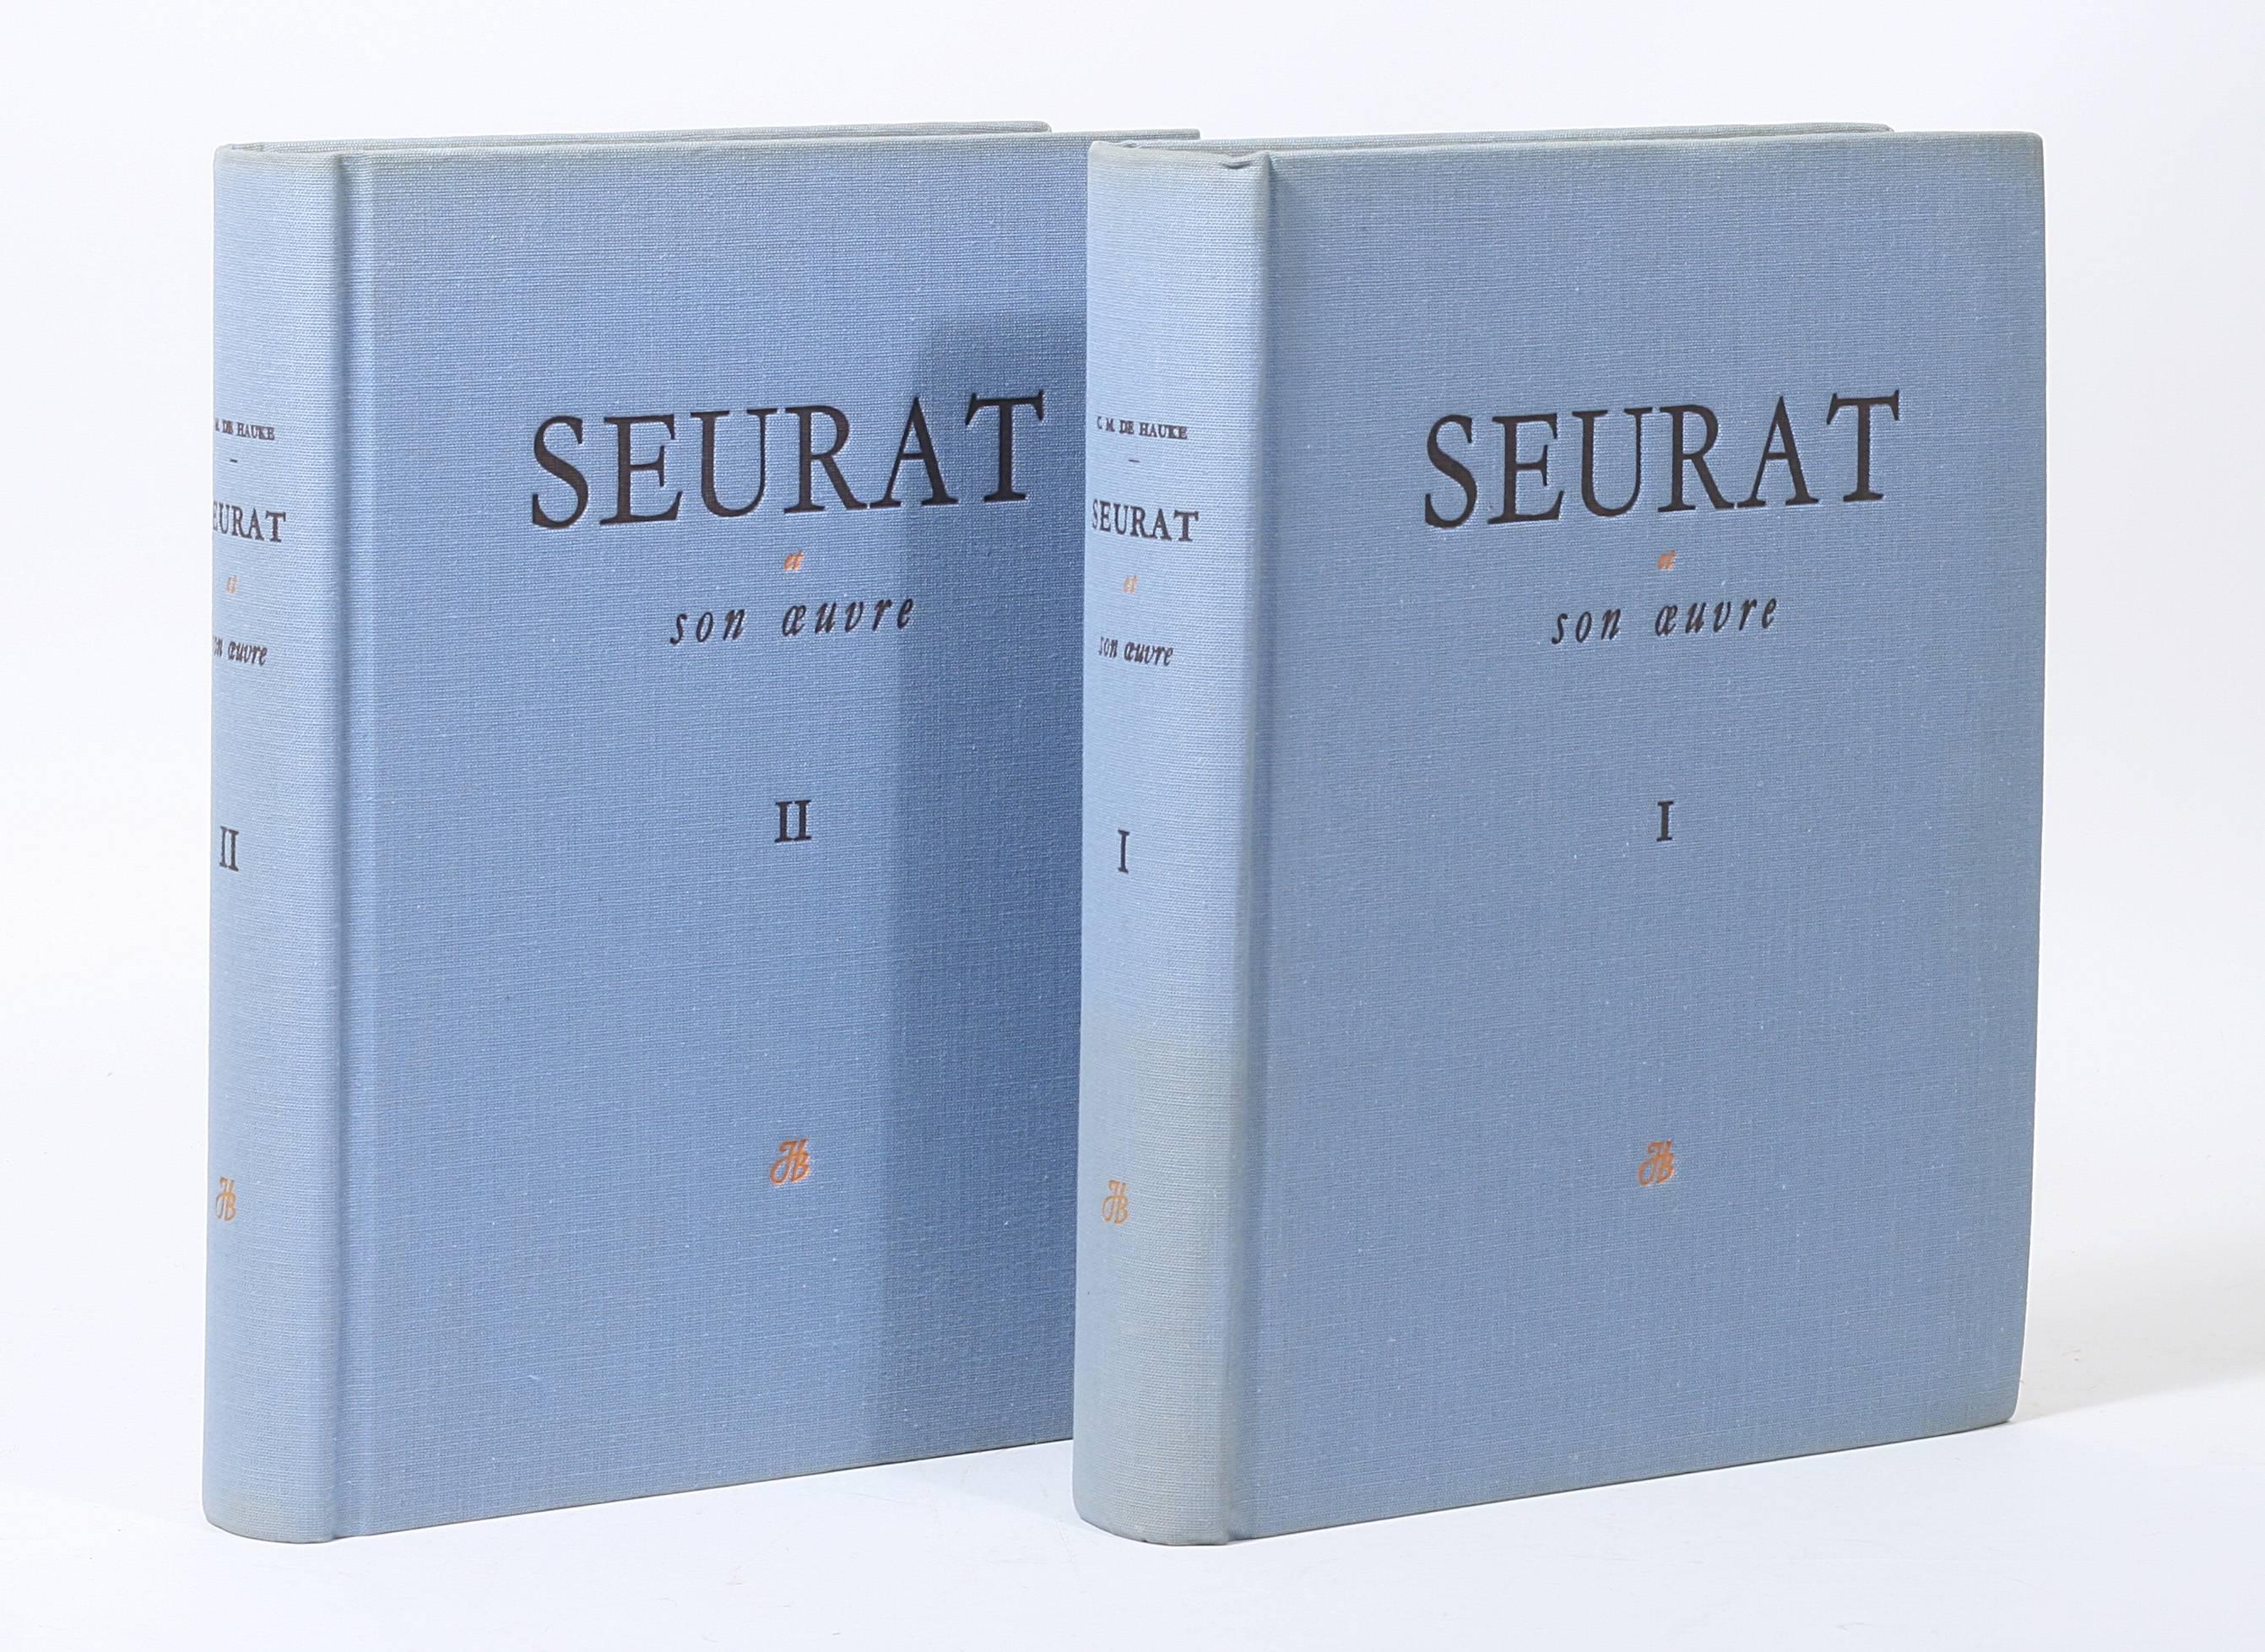 First edition, number 26 of only 50 copies of the exemplaires d'auteur from a total edition of 600. The authoritative catalogue raisonne of Seurat's work. With over 700 illustrations.

Paris: Grund, 1961. Large quarto (approximately 11 x 13